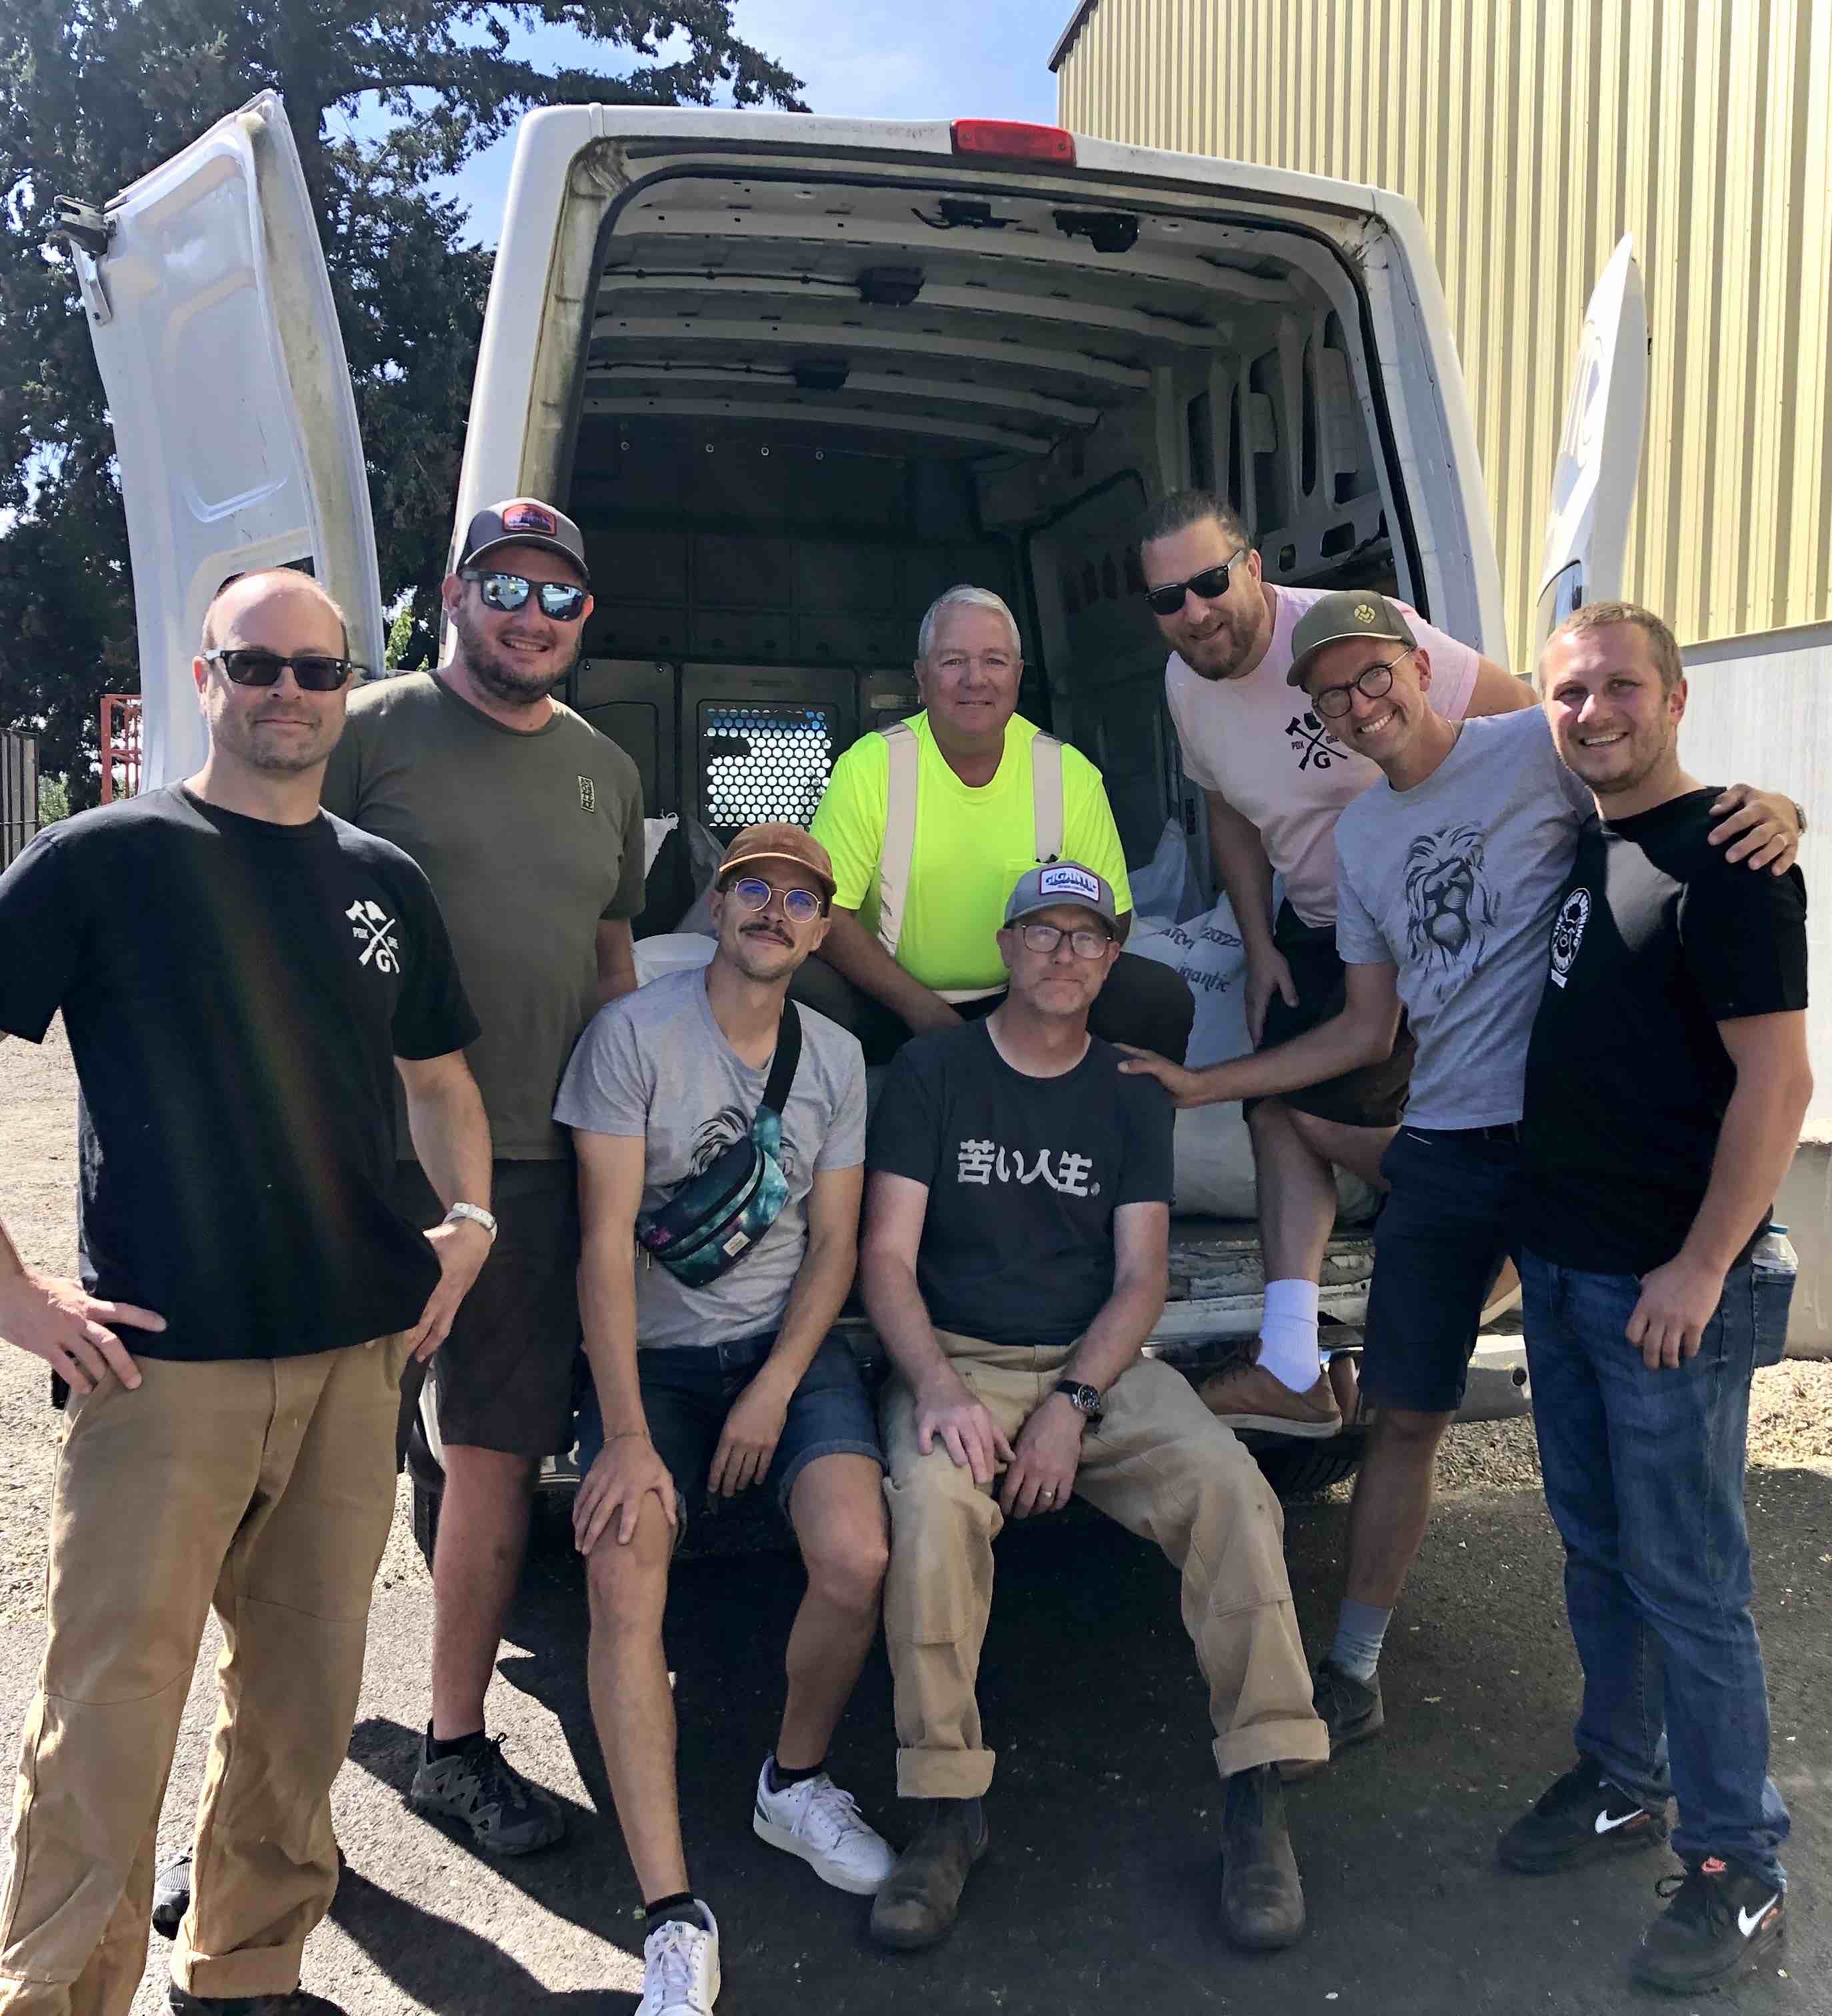 Gigantic Brewing with French Brewers at Sodbuster Farms. (image courtesy of Gigantic Brewing)